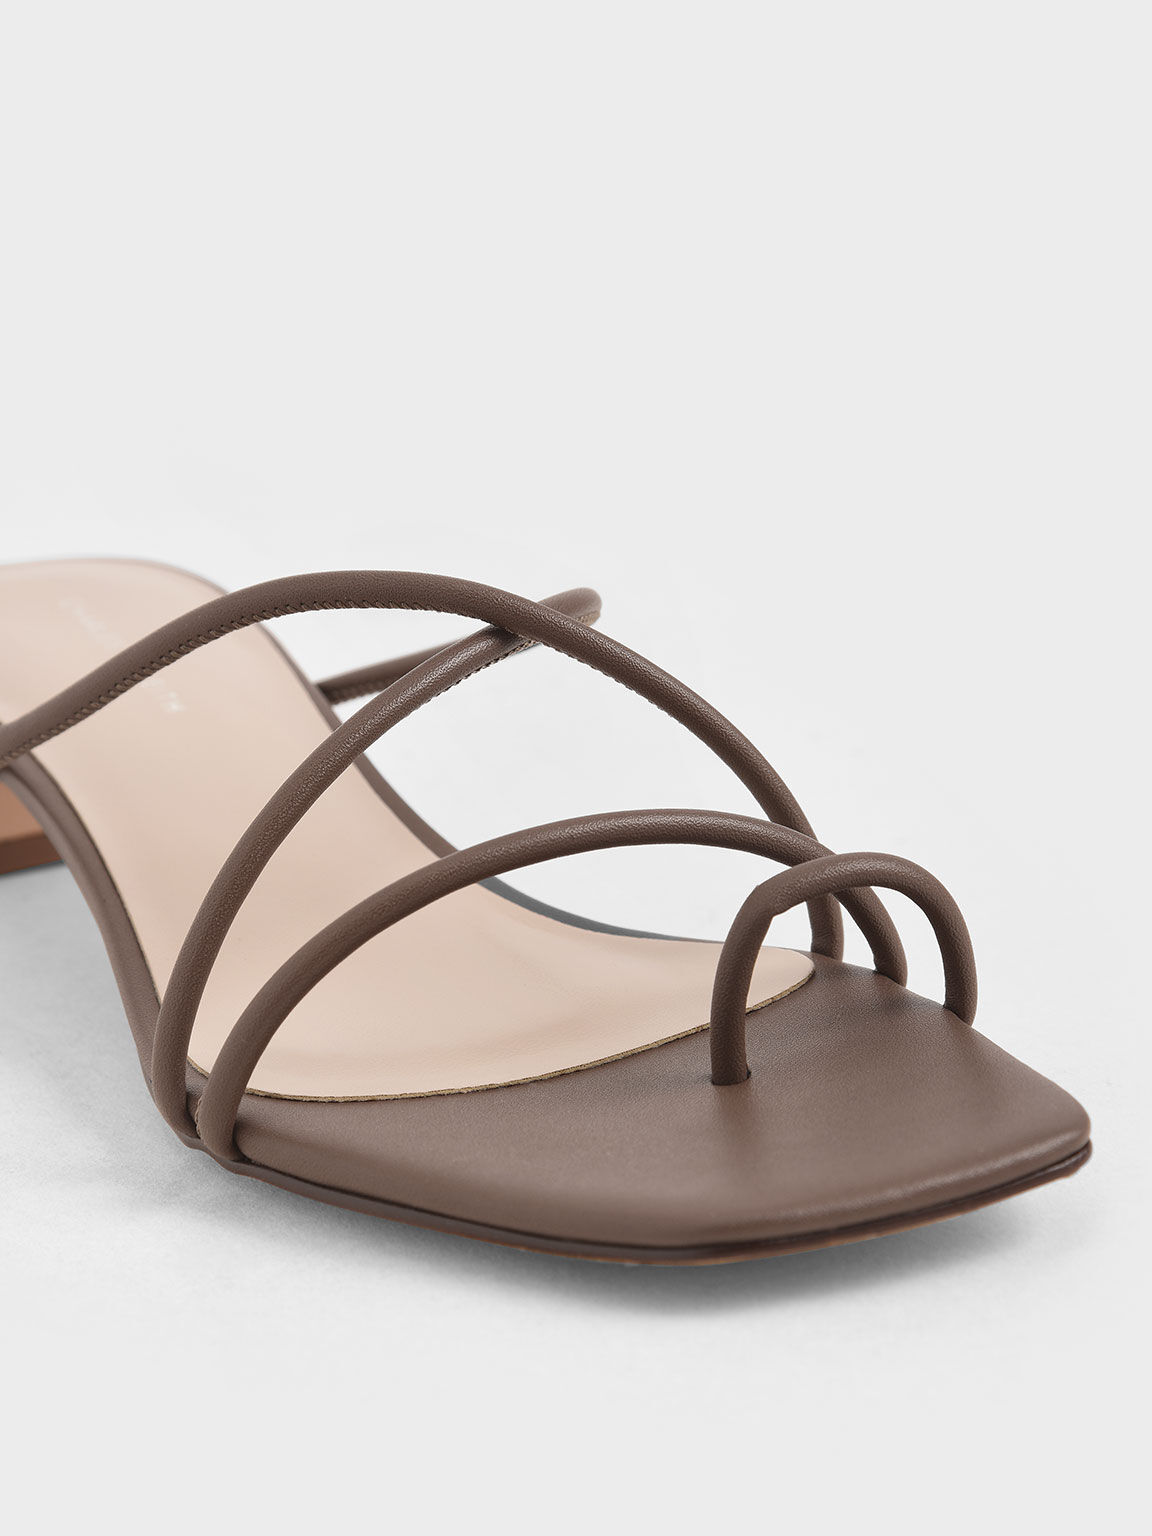 Strappy Toe Ring Sandals, Brown, hi-res